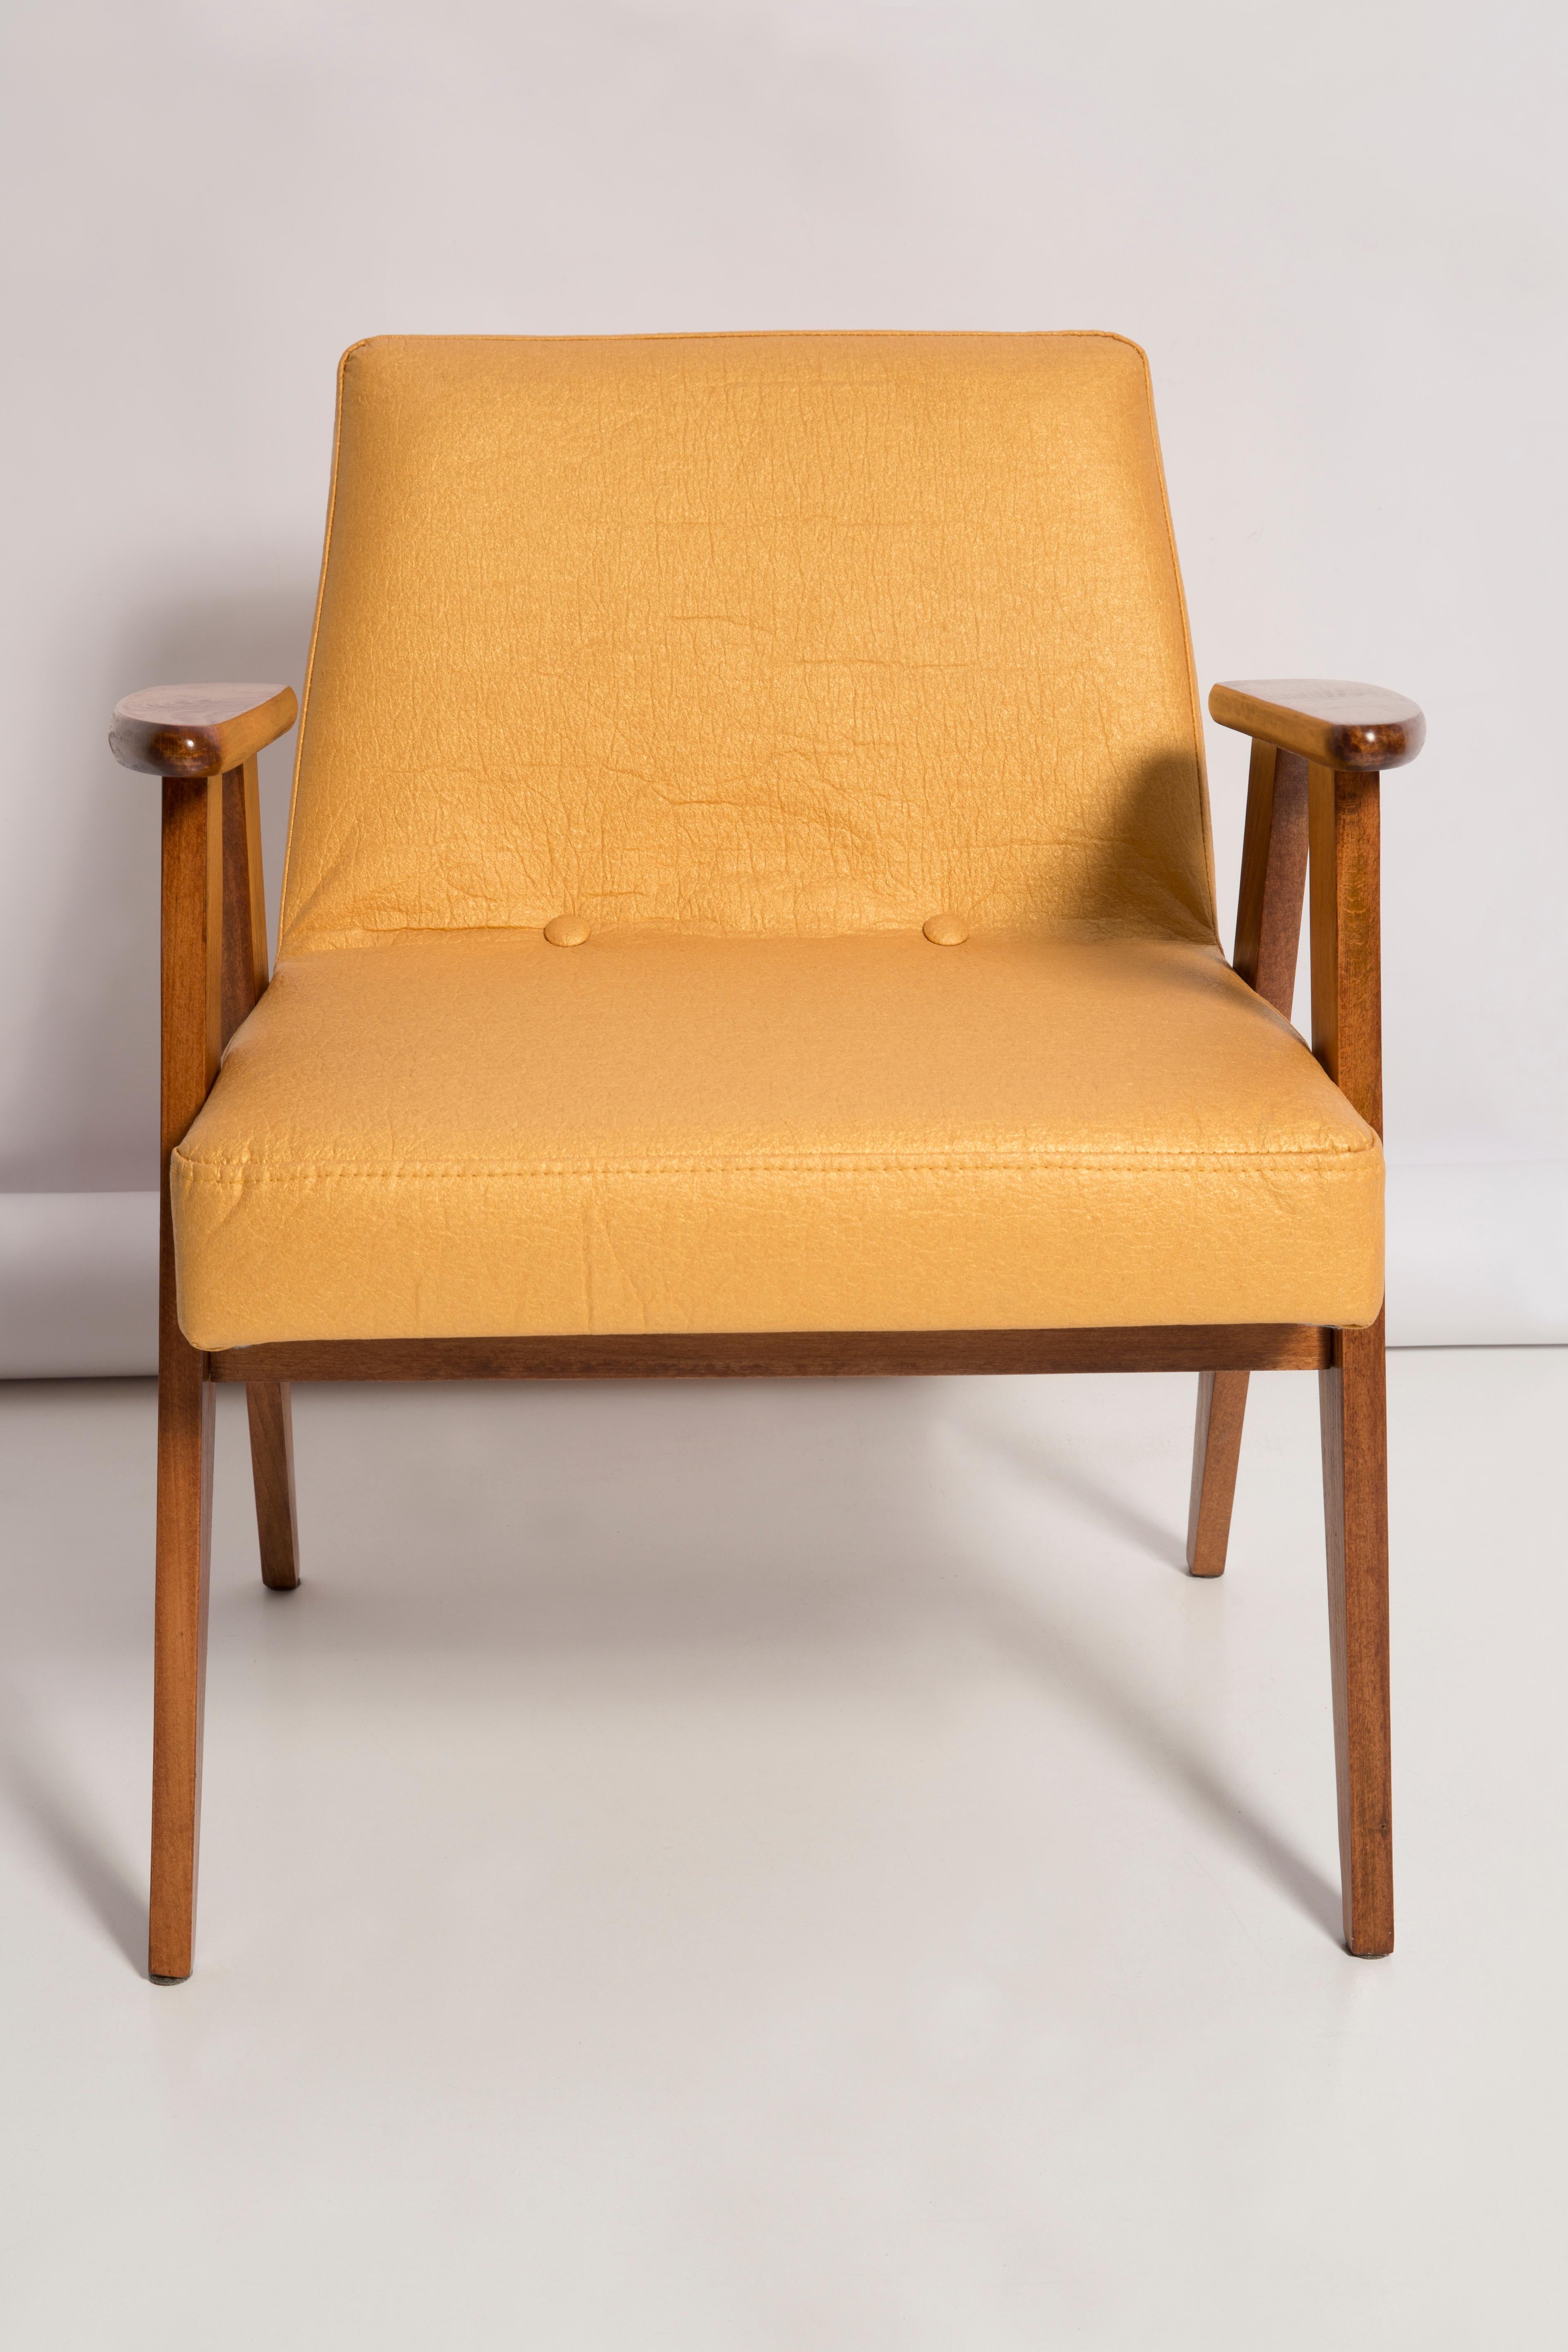 Midcentury 366 Club Armchair in Gold Pineapple Leather, Jozef Chierowski, 1960s For Sale 4